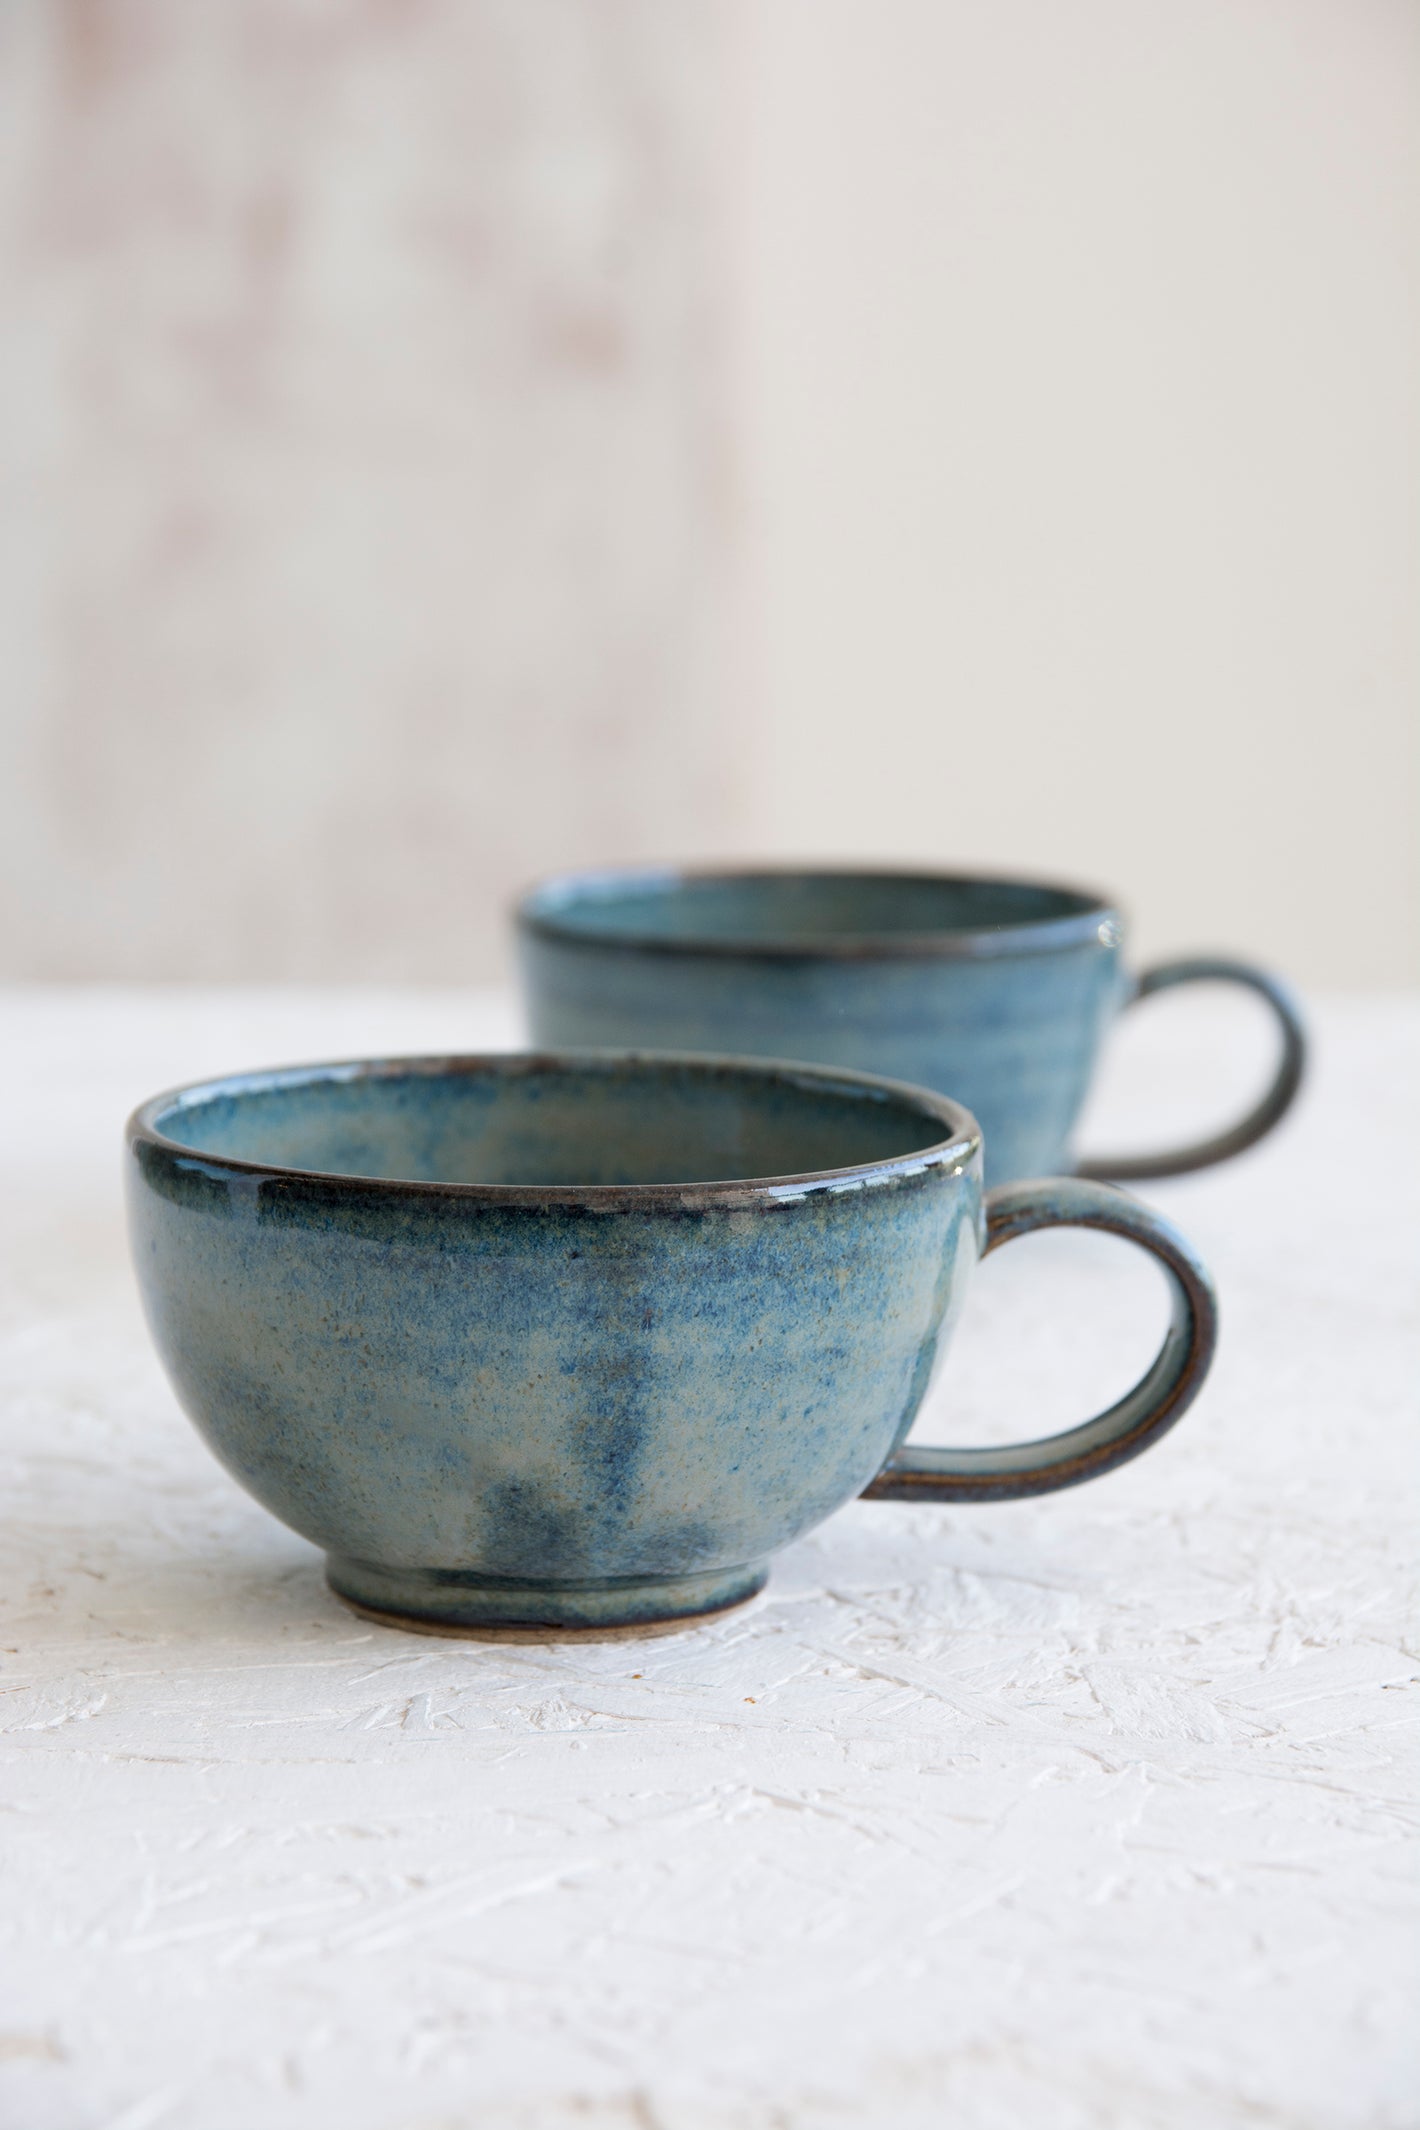 How To Make Pottery At Home: All Materials & Equipment You Need